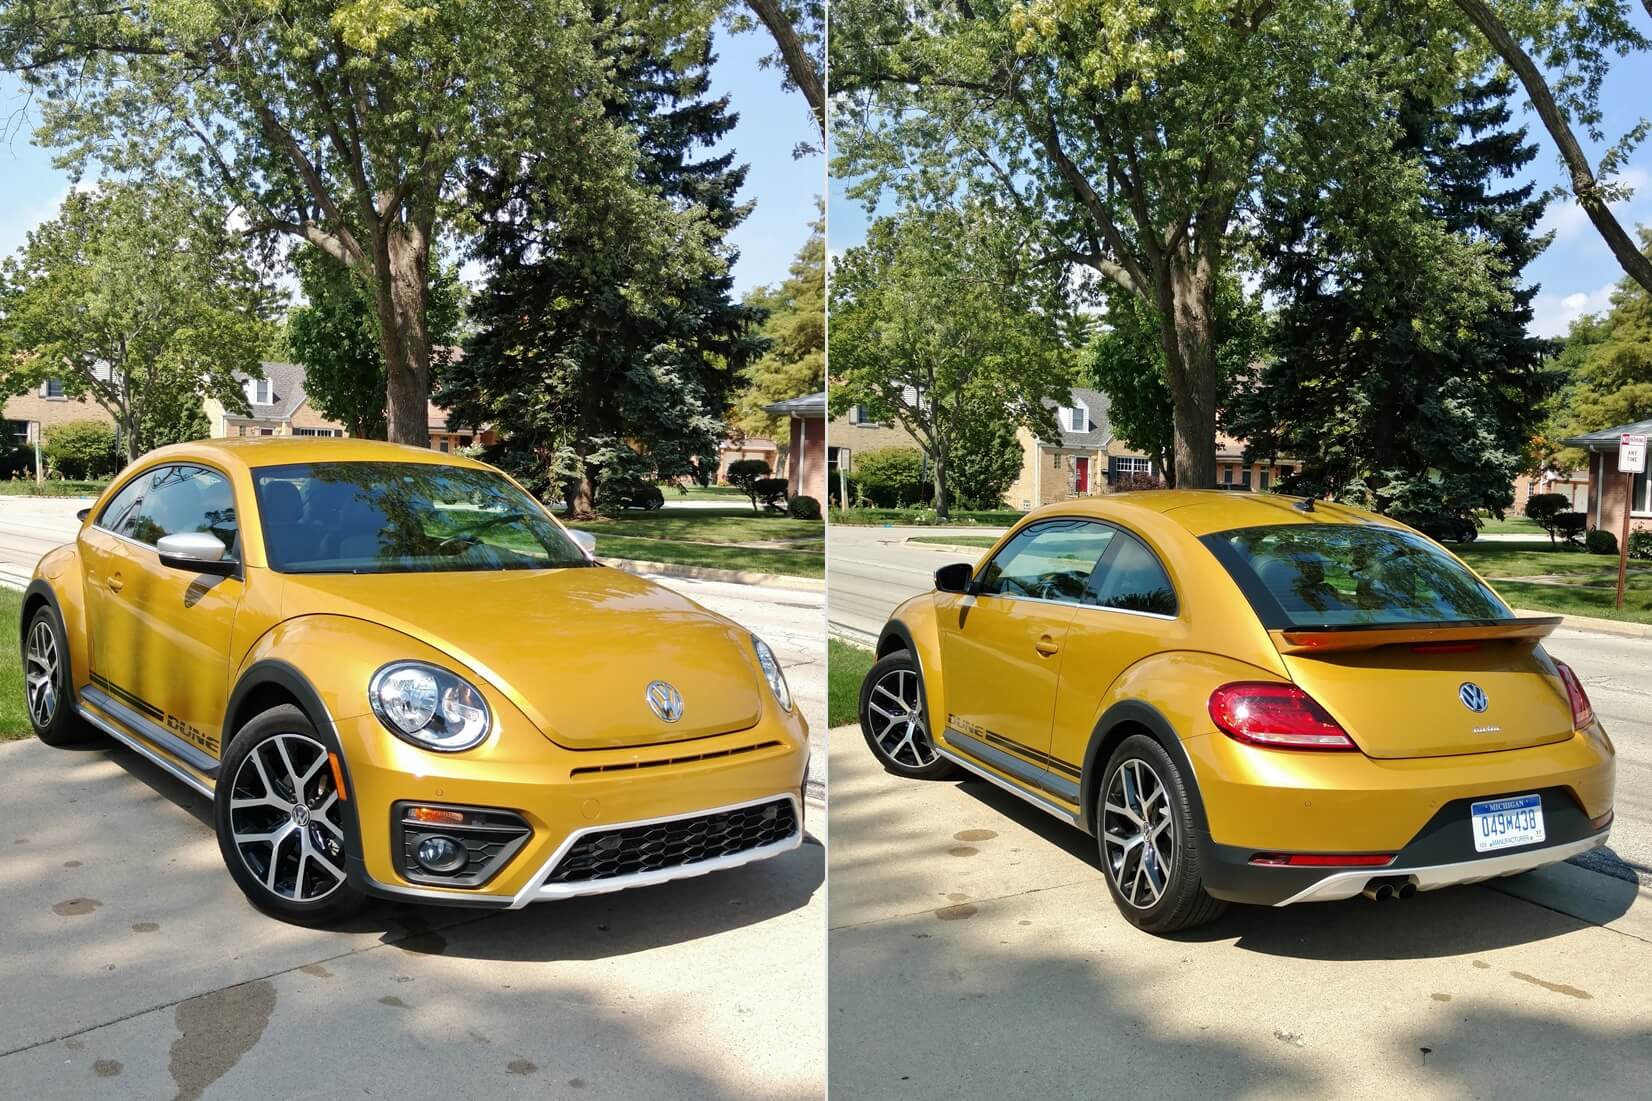 2017 Volkswagen Beetle Dune: Colored in Sandstorm Yellow Metallic, probably the last special edition Beetle is the most assertive yet.